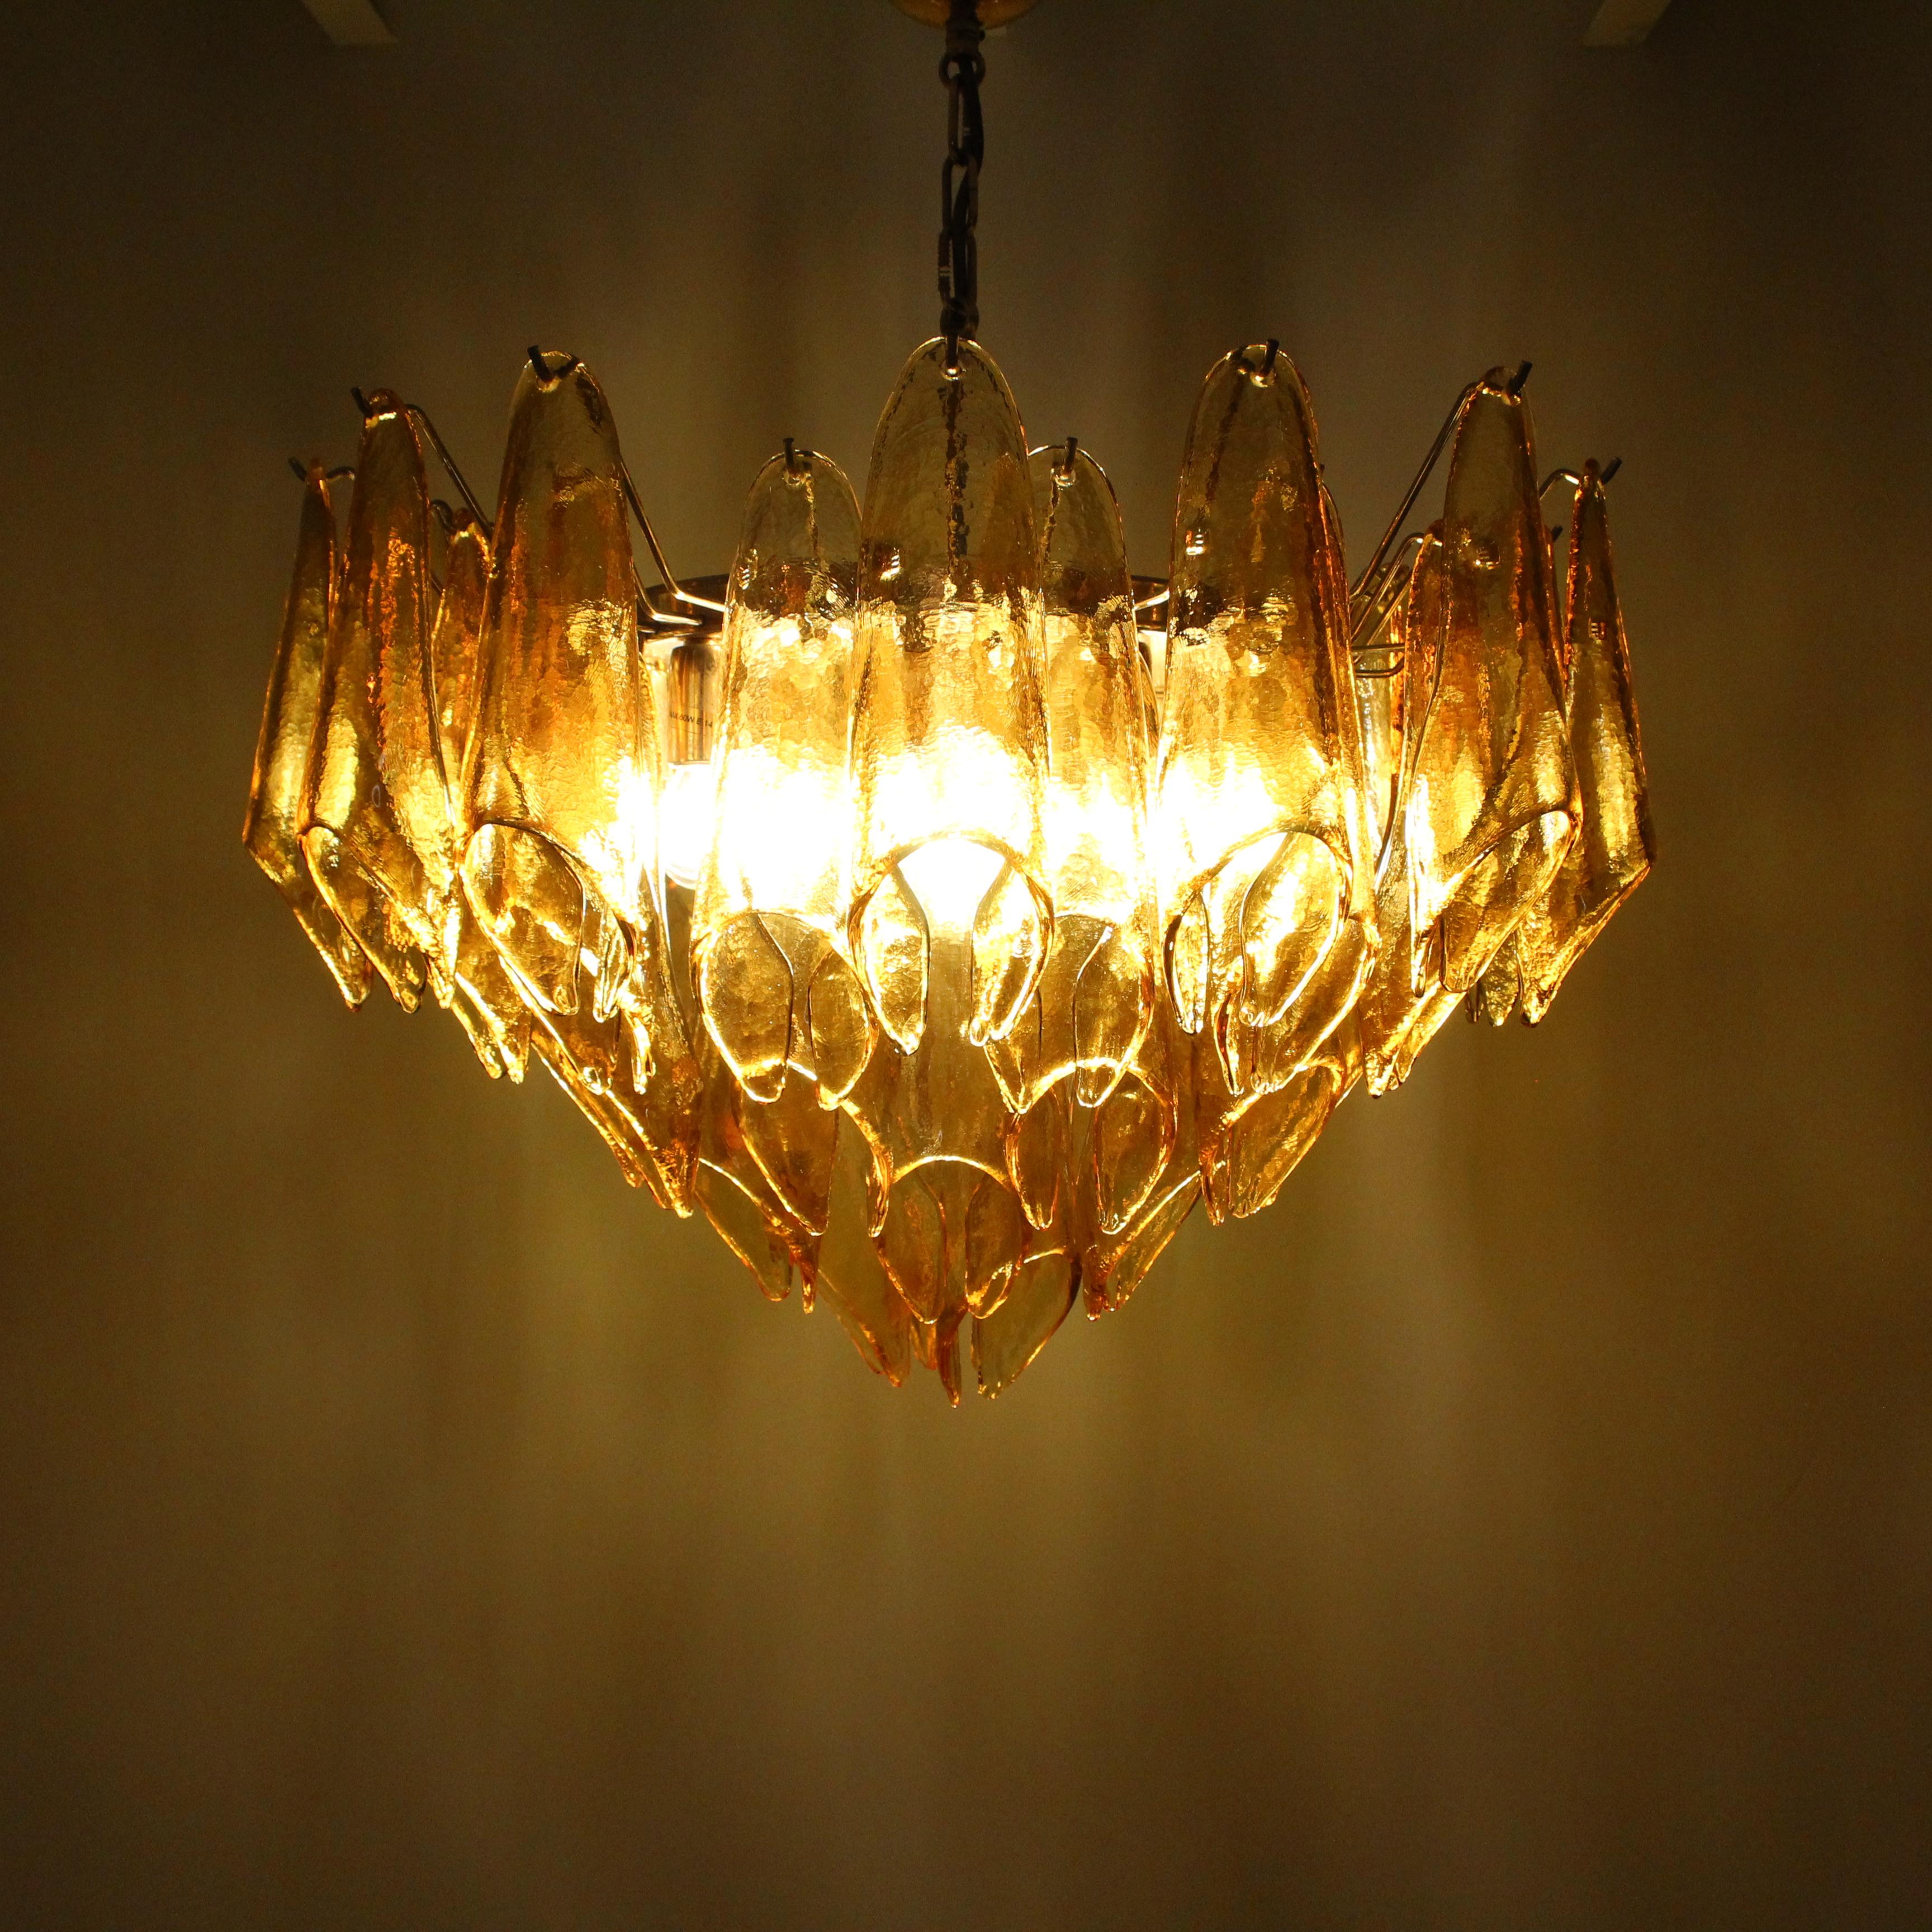 The magnificent chandelier adorned with yellow Murano glass elements is a masterpiece of rare beauty, crafted by the esteemed manufacturer La Murrina. This luminous creation encapsulates the Venetian artisanal artistry for which the glassworks are